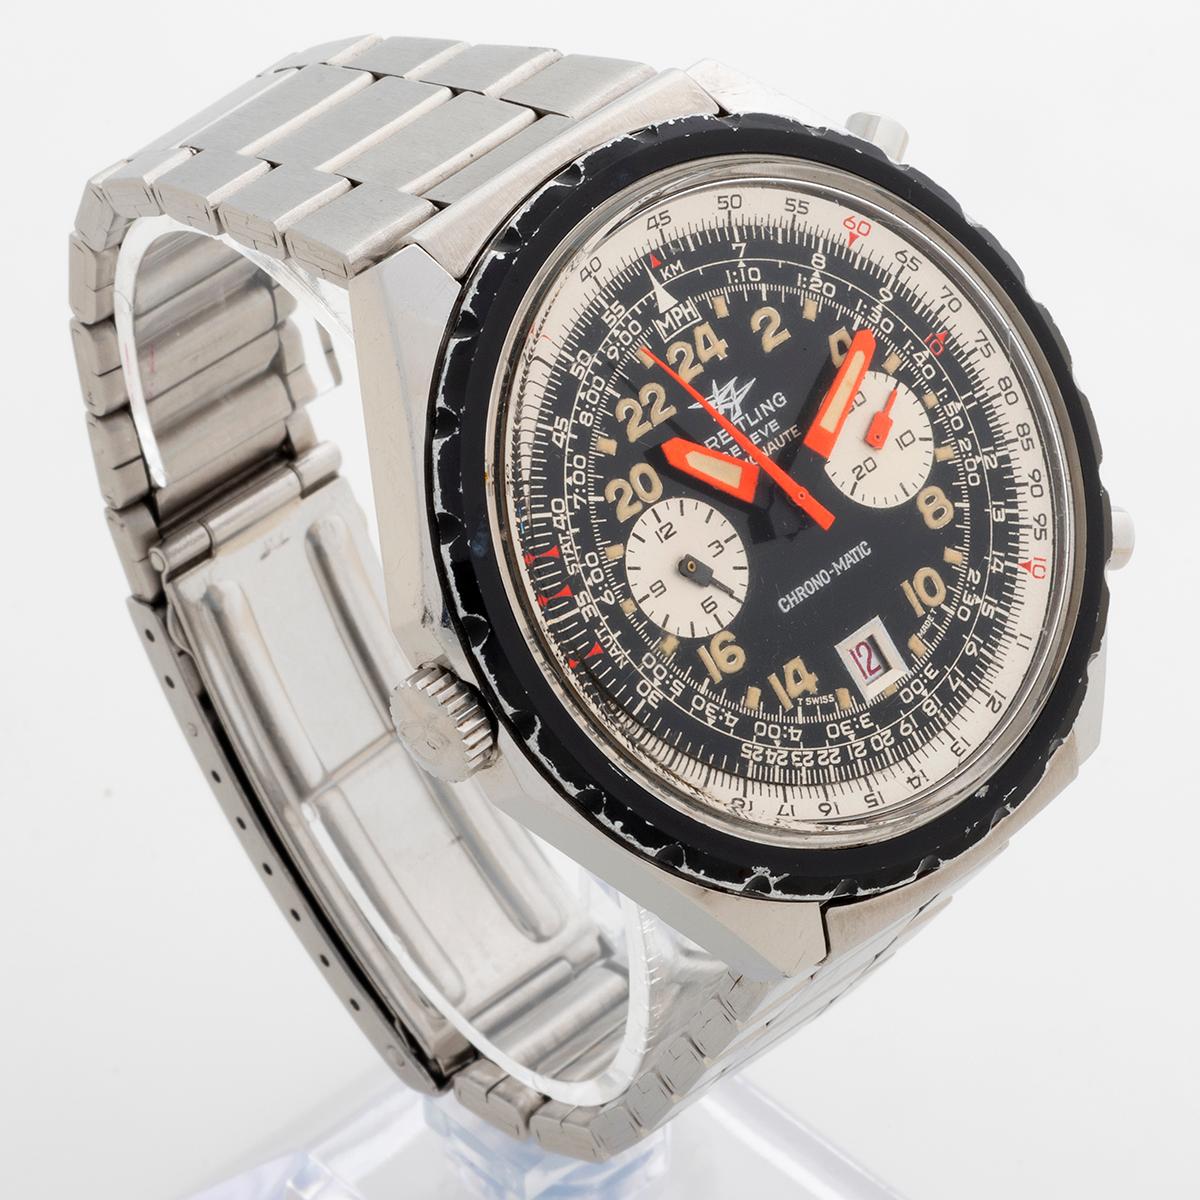 Our rare, vintage and historical important Breitling Cosmonaute Chrono-matic referent 1809 , with cal.11 movement was one of the first automatic chronographs to be launched for sale, introduced in 1967. Equally of note is the 24 hour continuous